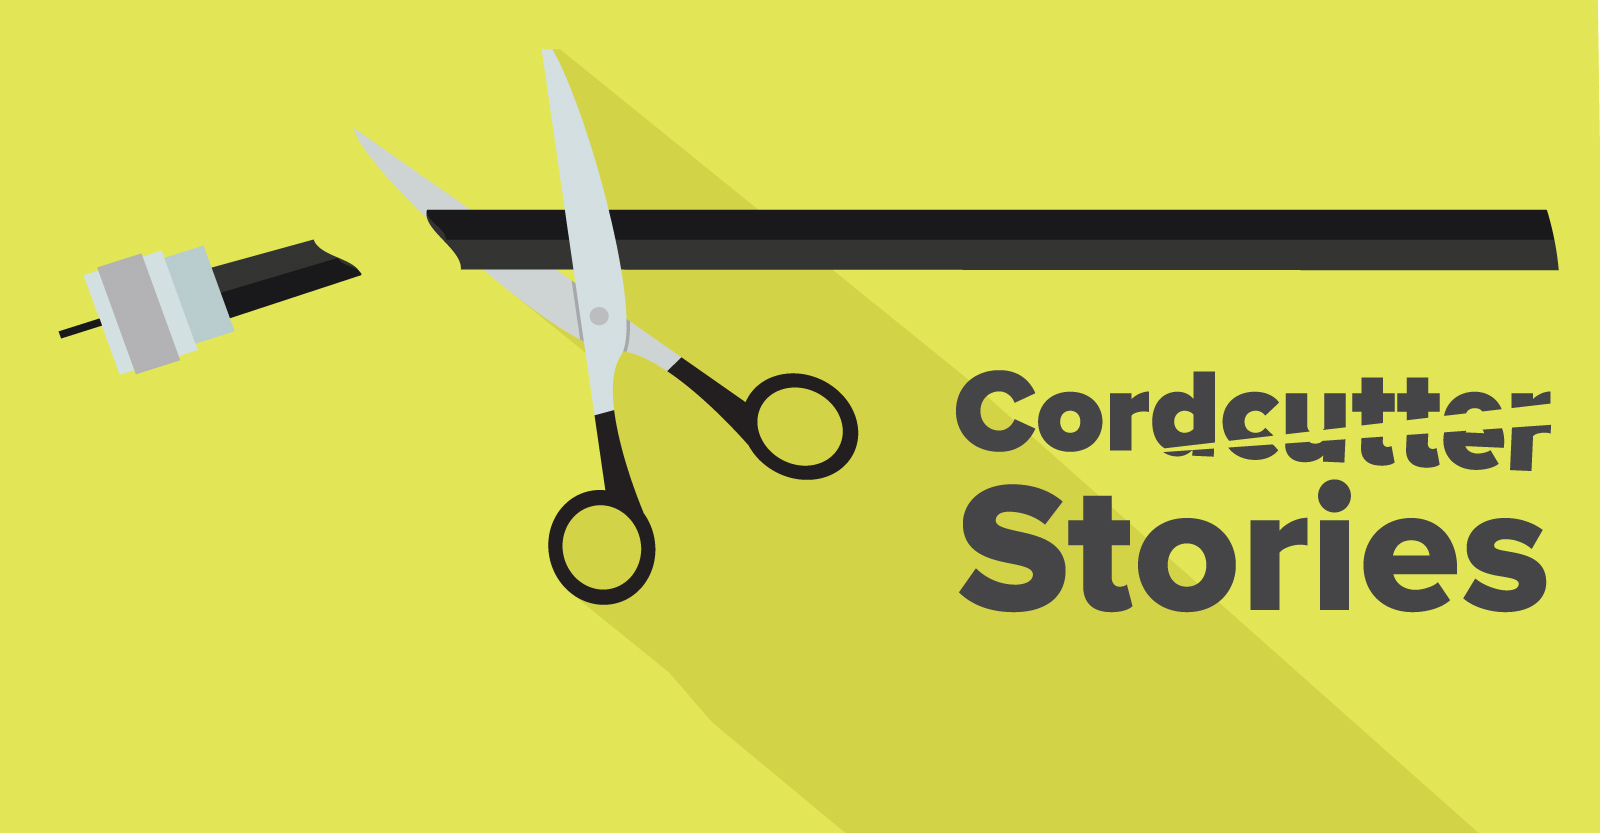 Cord Cutter Stories, cartoon image of scissors cutting a coax cable